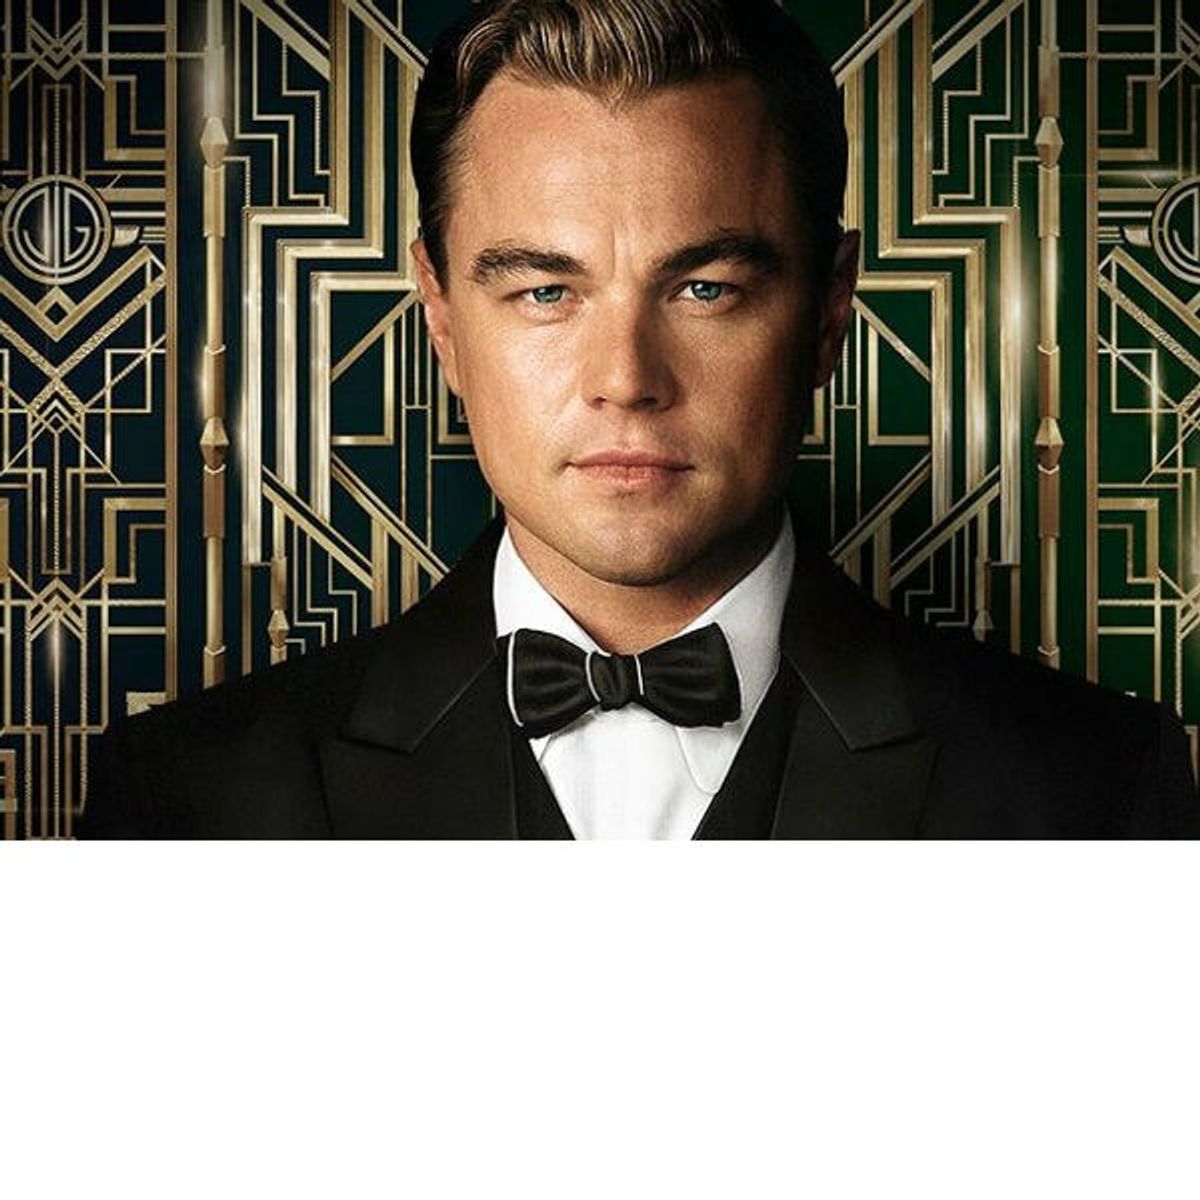 What Makes Gatsby So Great?